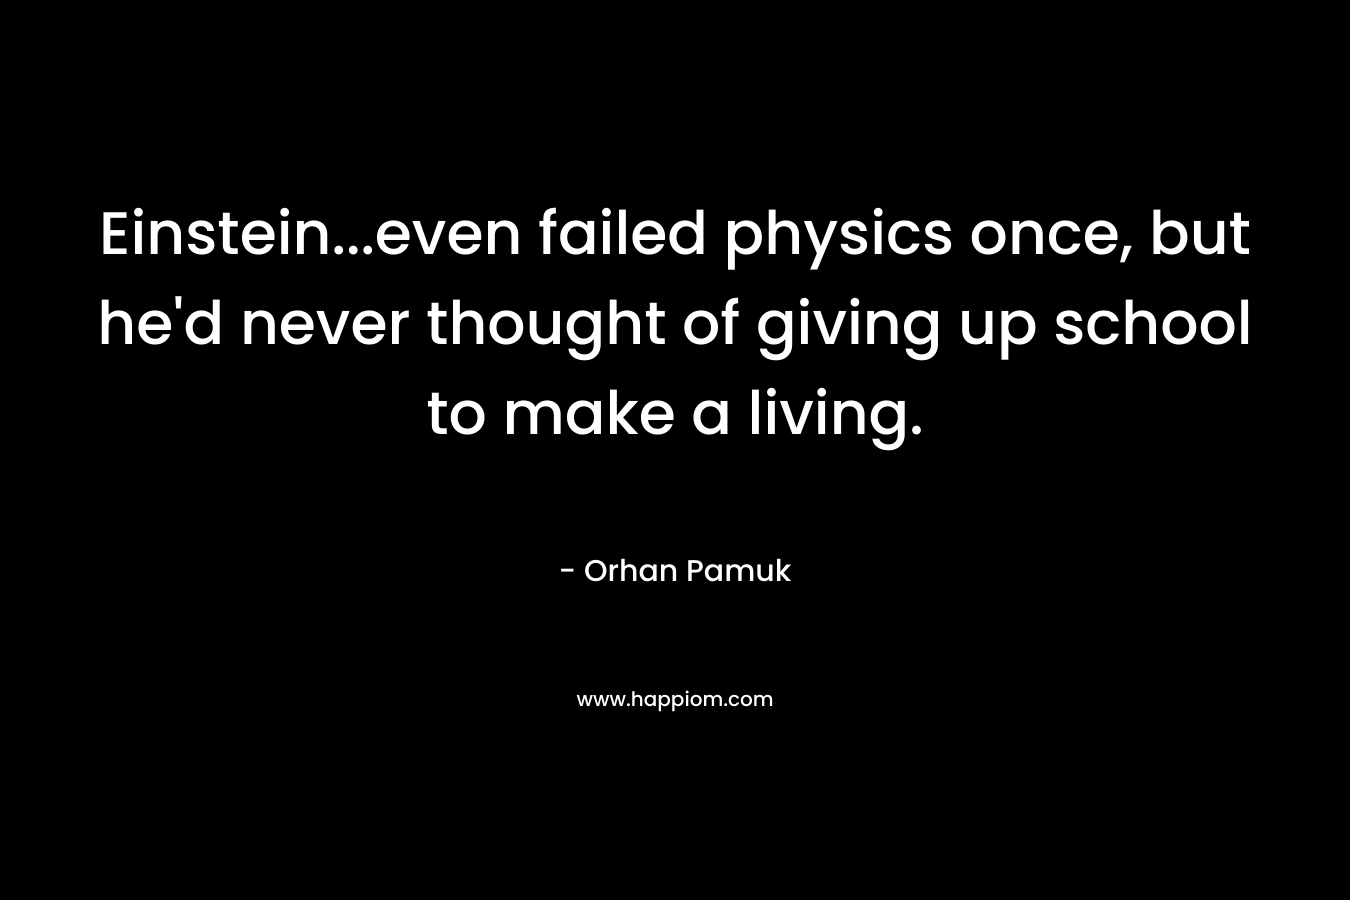 Einstein...even failed physics once, but he'd never thought of giving up school to make a living.